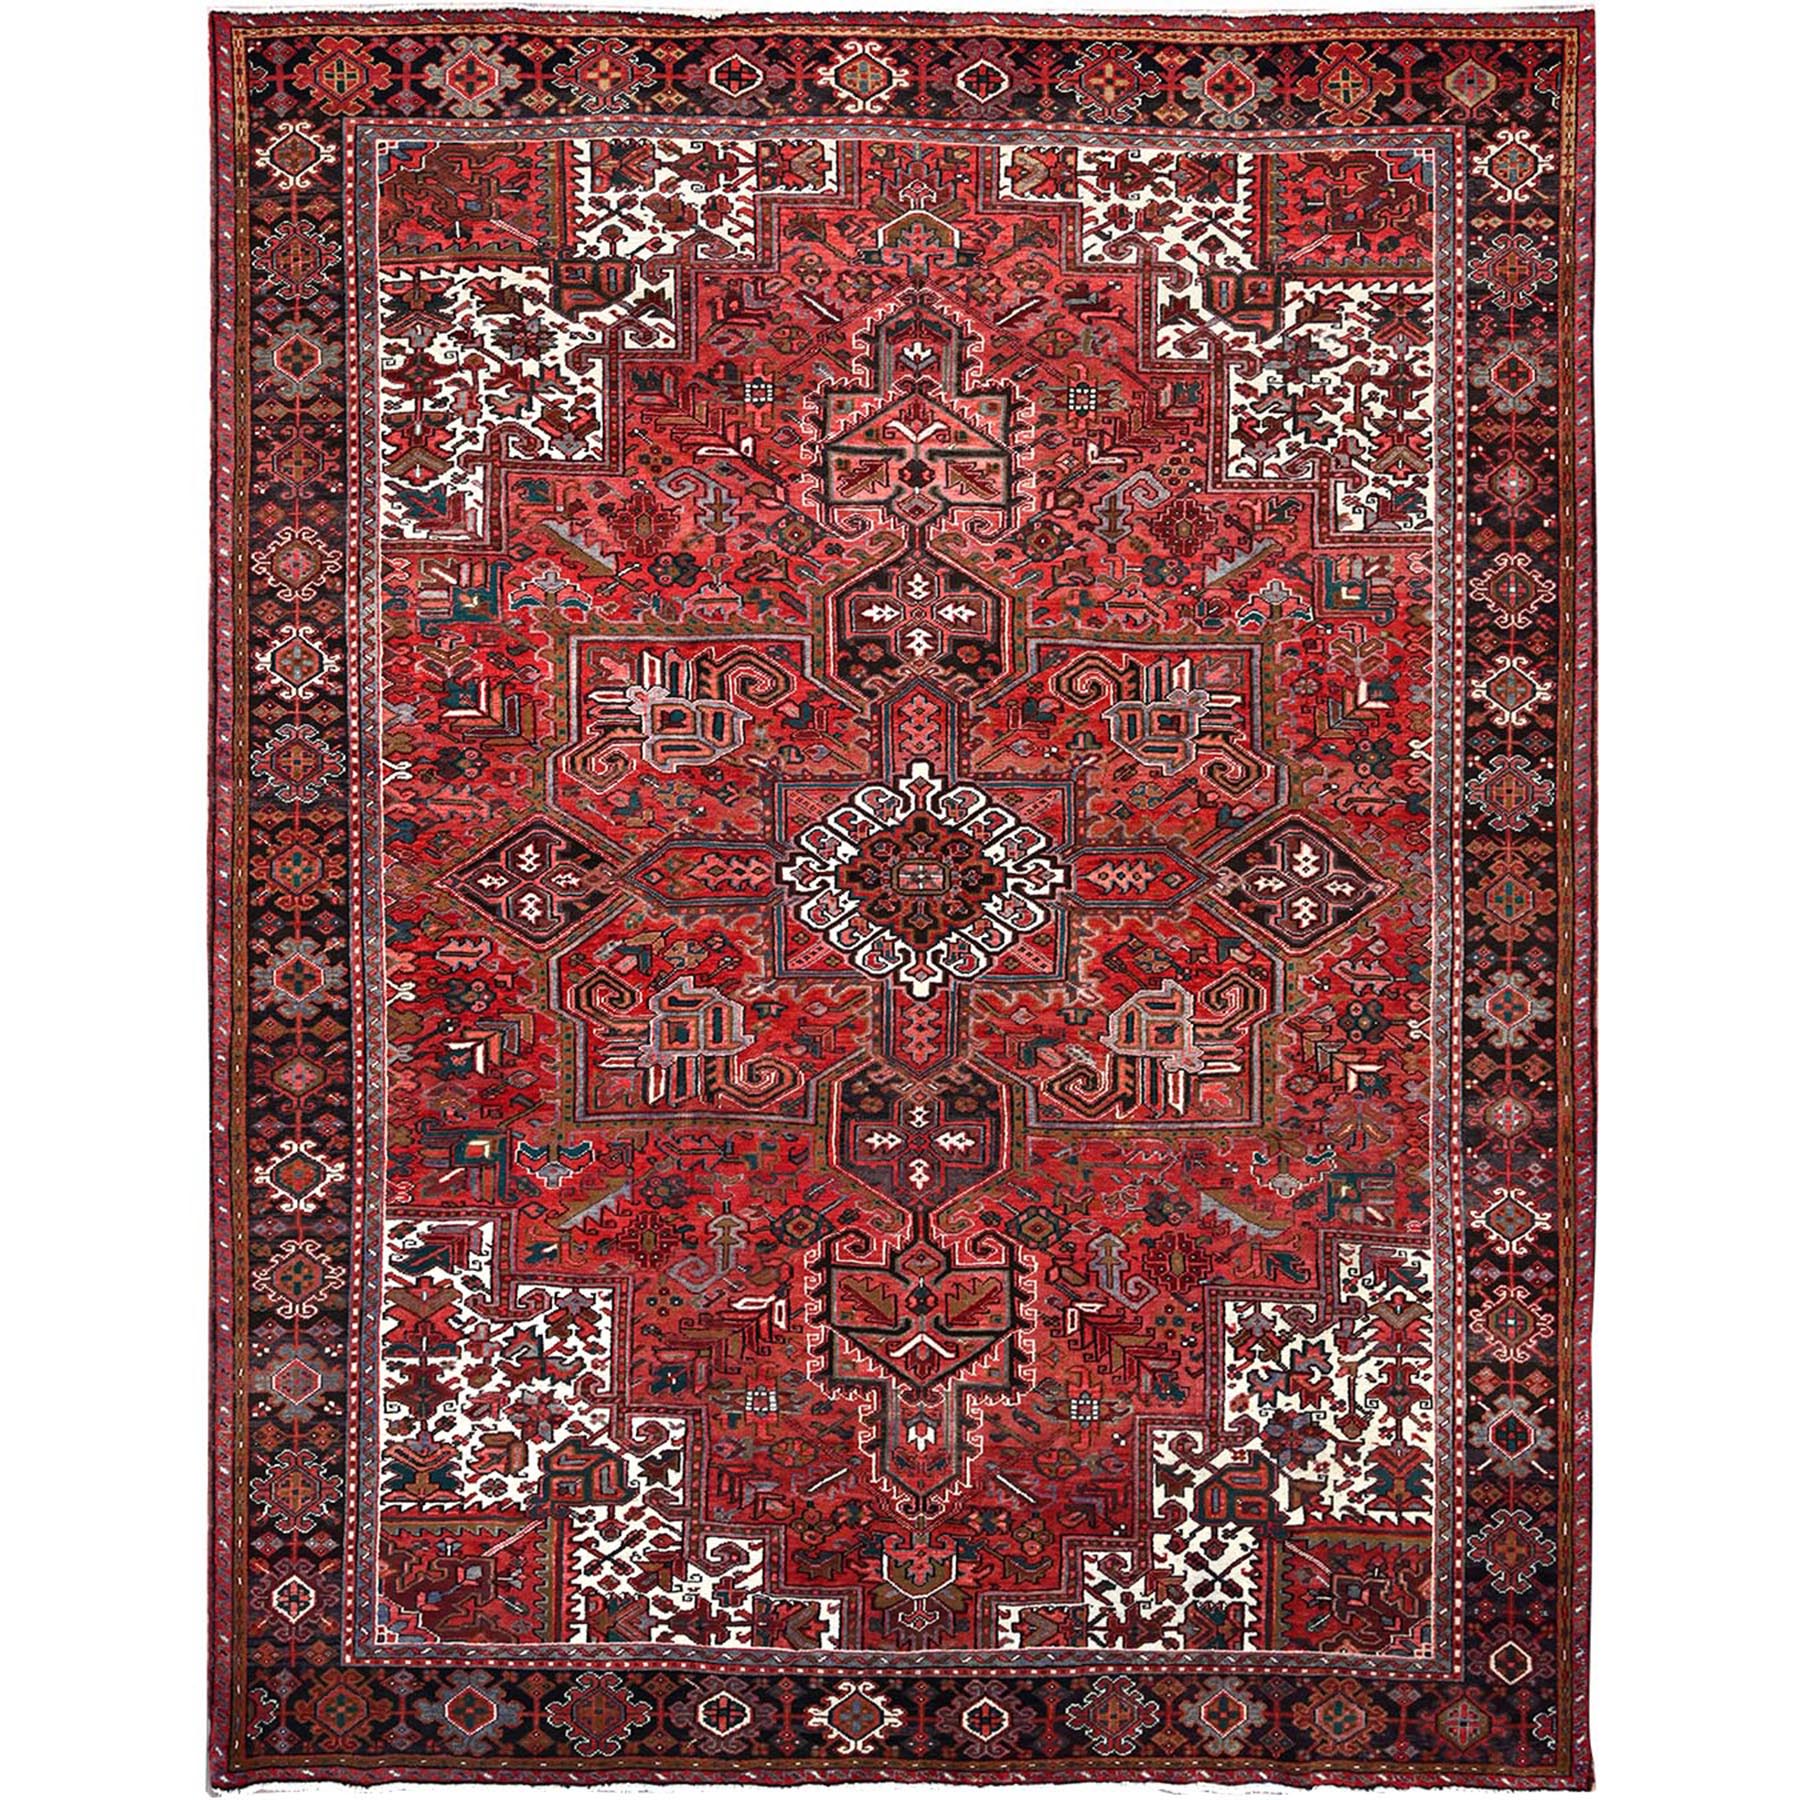  Wool Hand-Knotted Area Rug 9'11